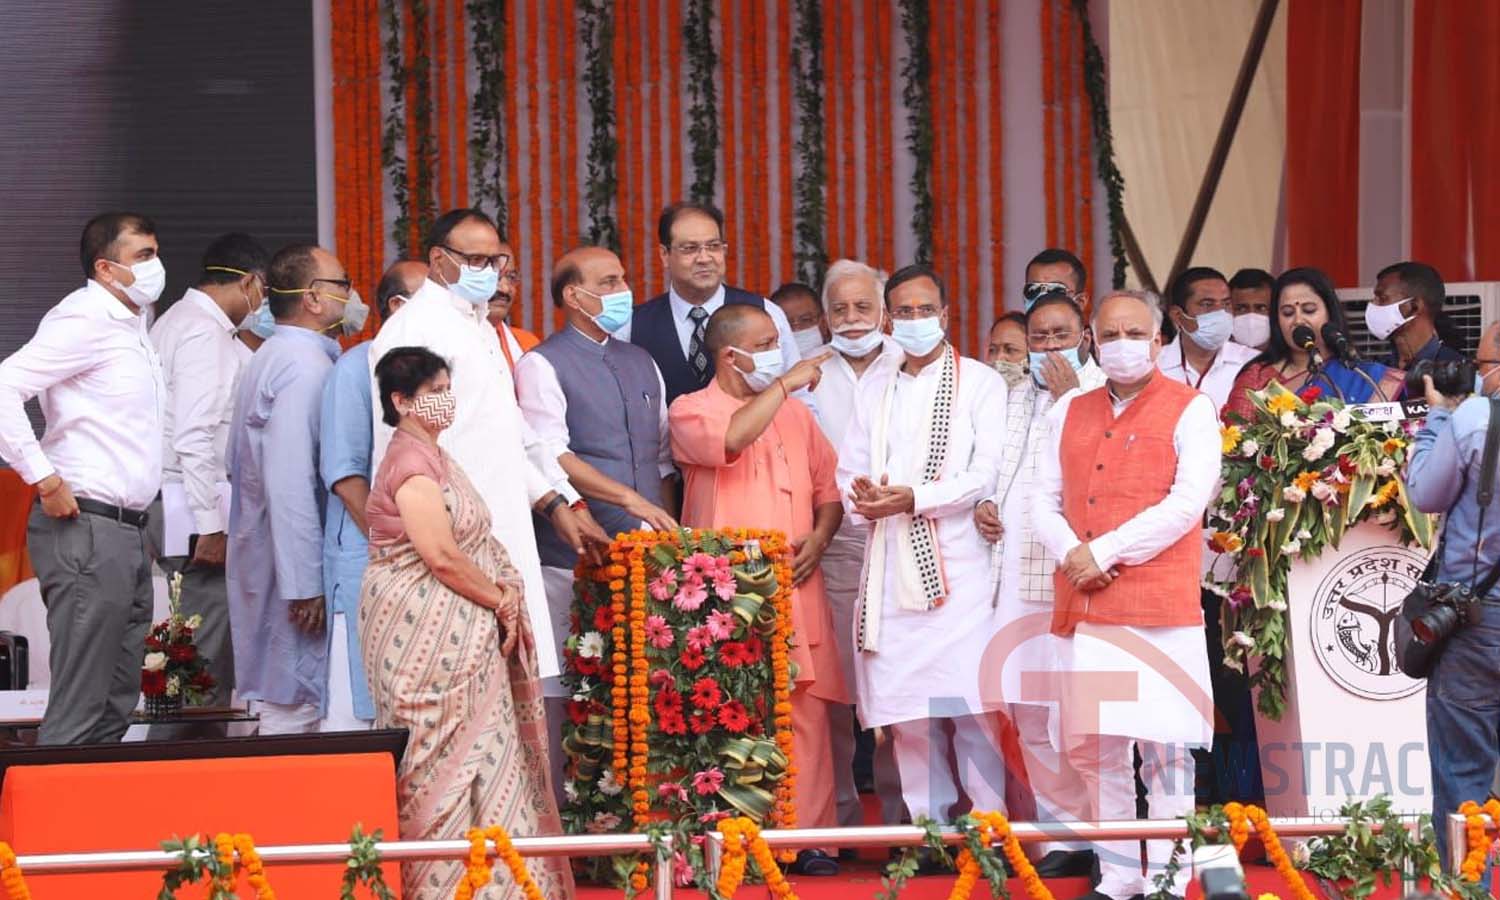 Defense Minister Rajnath Singh inaugurating and laying the foundation stone of projects in Lucknow